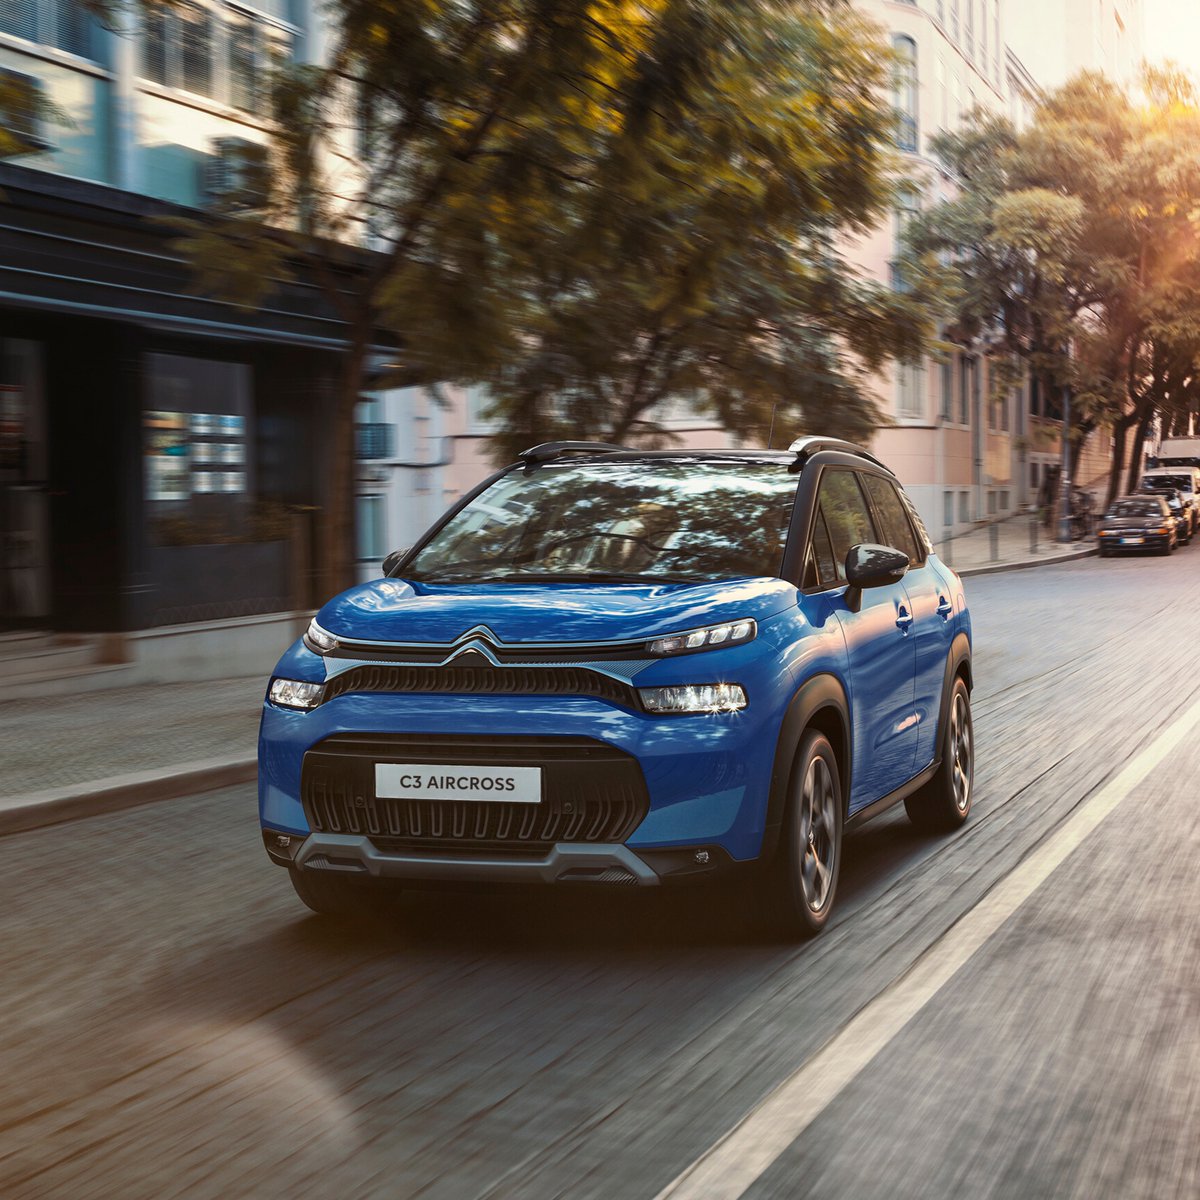 The practical one. The Compact SUV for life’s adventures🏔 #C3Aircross Versatile & modular interior with Citroën Advanced Comfort® seats Experience the C3 Aircross for yourself... book a test drive today: shorturl.at/fqwW4 #Citroën #CitroënUK